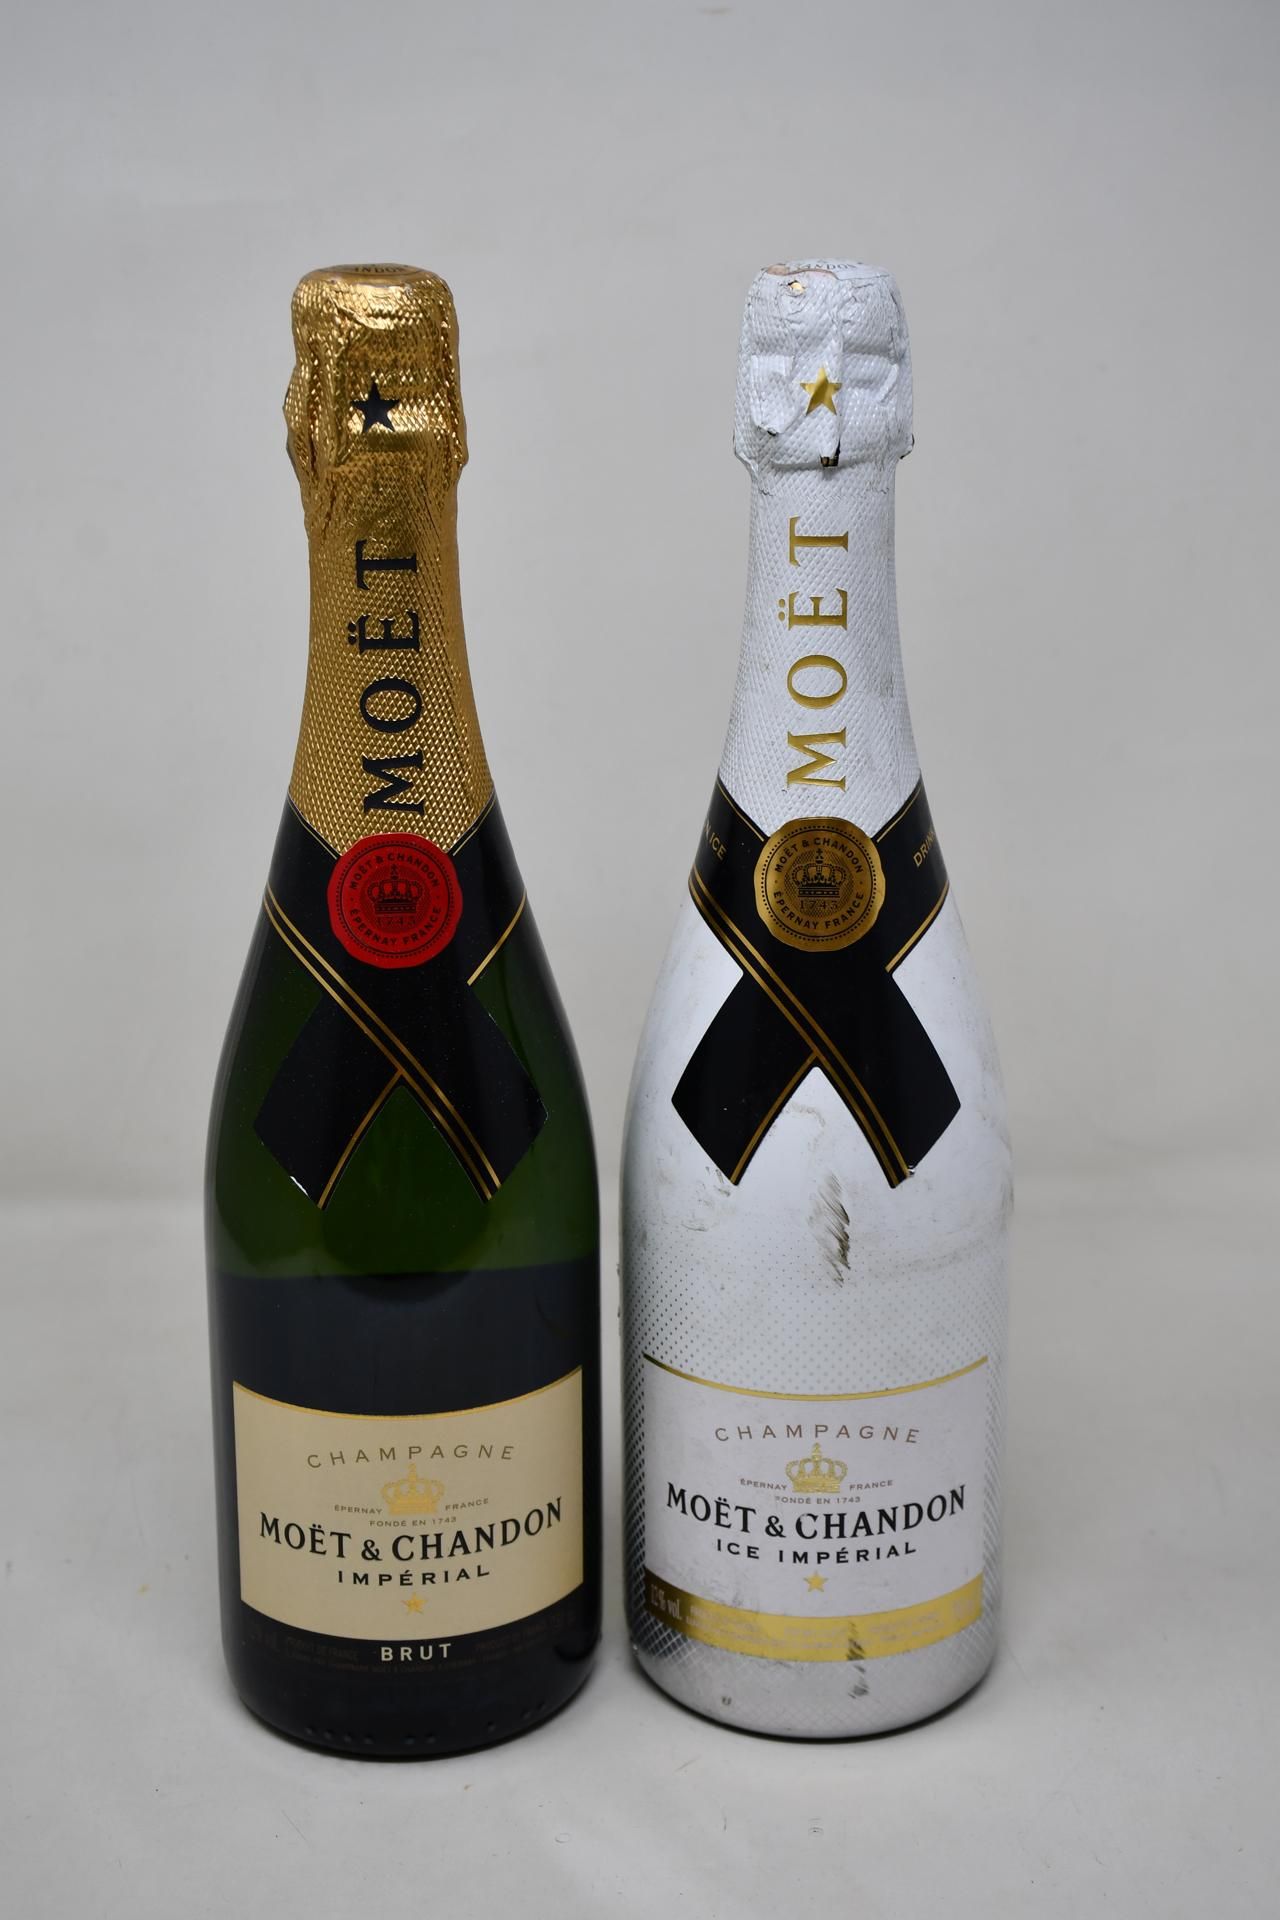 Moet & Chandon Ice Imperial (750ml) and Moet & Chandon (750ml) (Over 18s only).